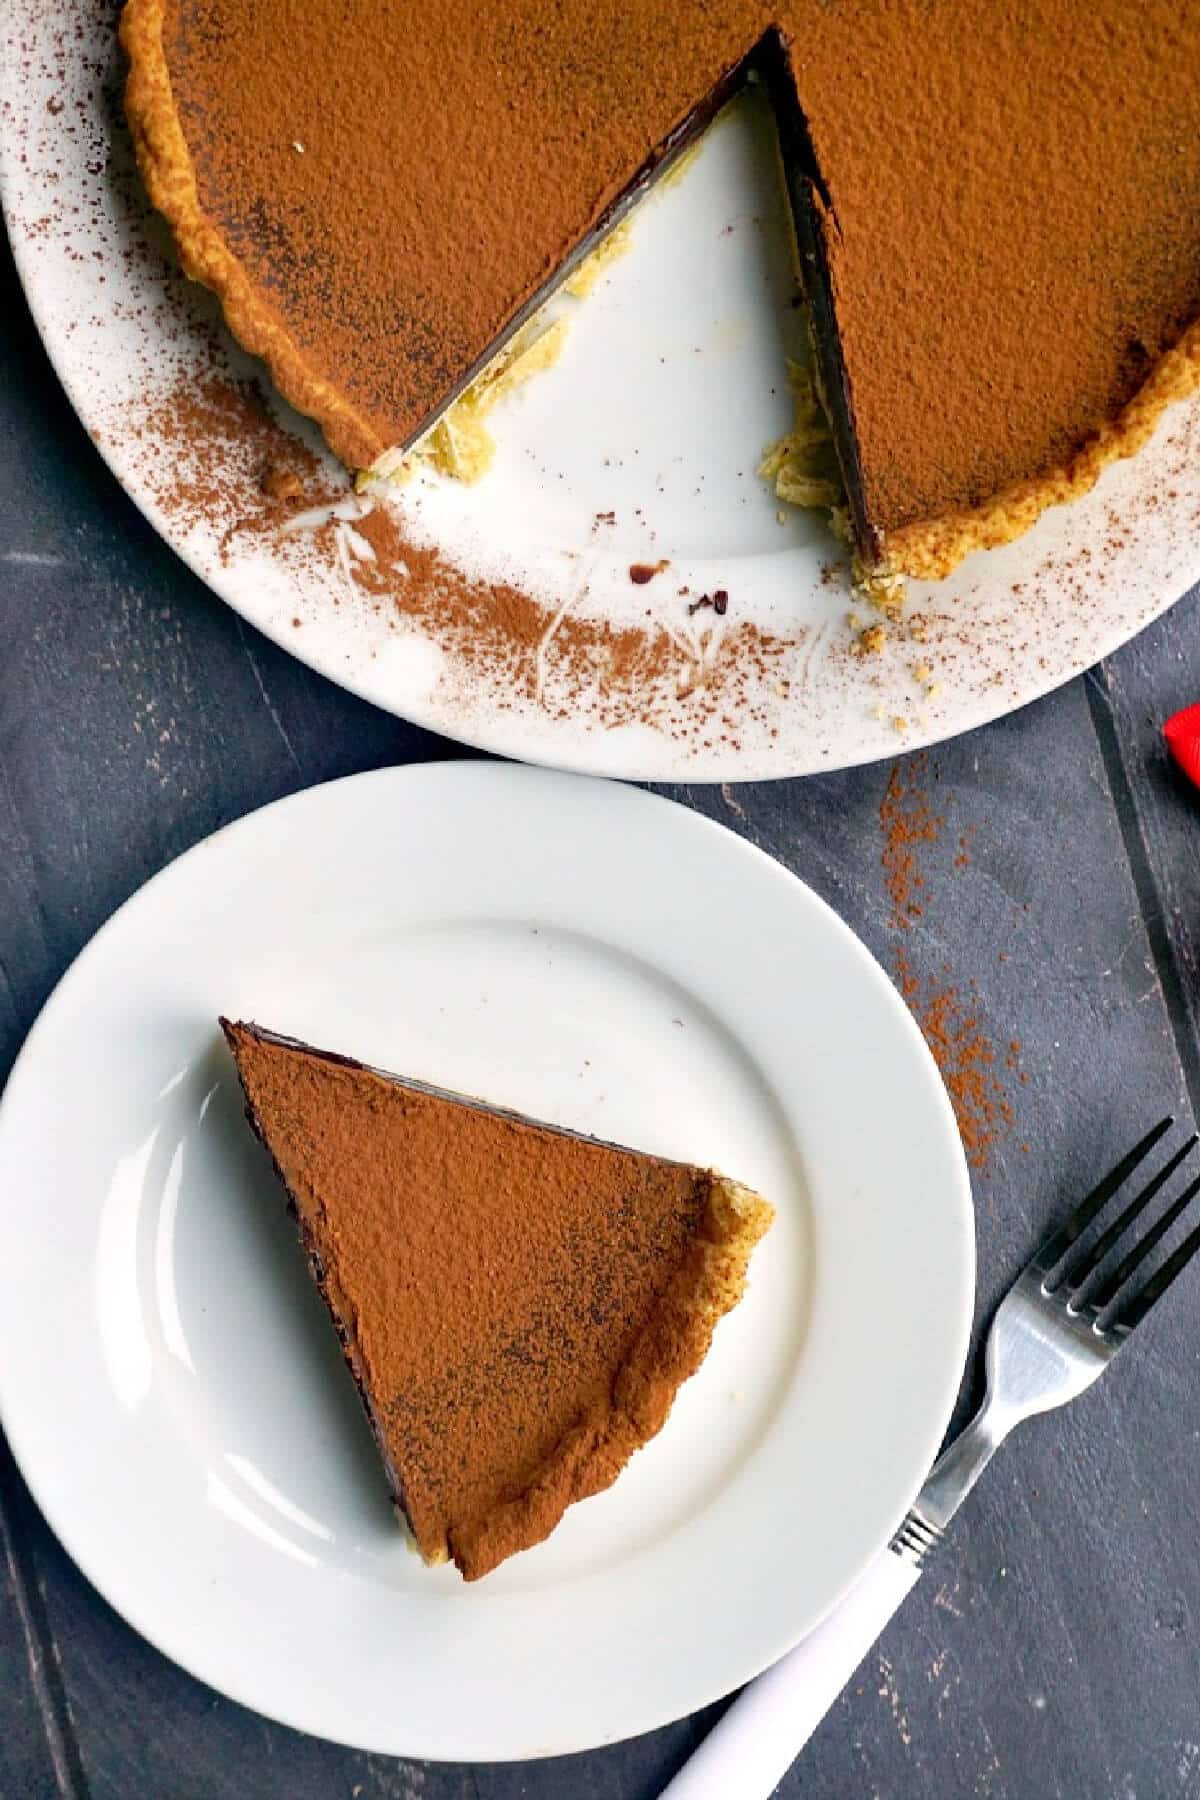 Overhead shoot of a white plate with a slice of chocolate tart and another plate with the rest of the tart.